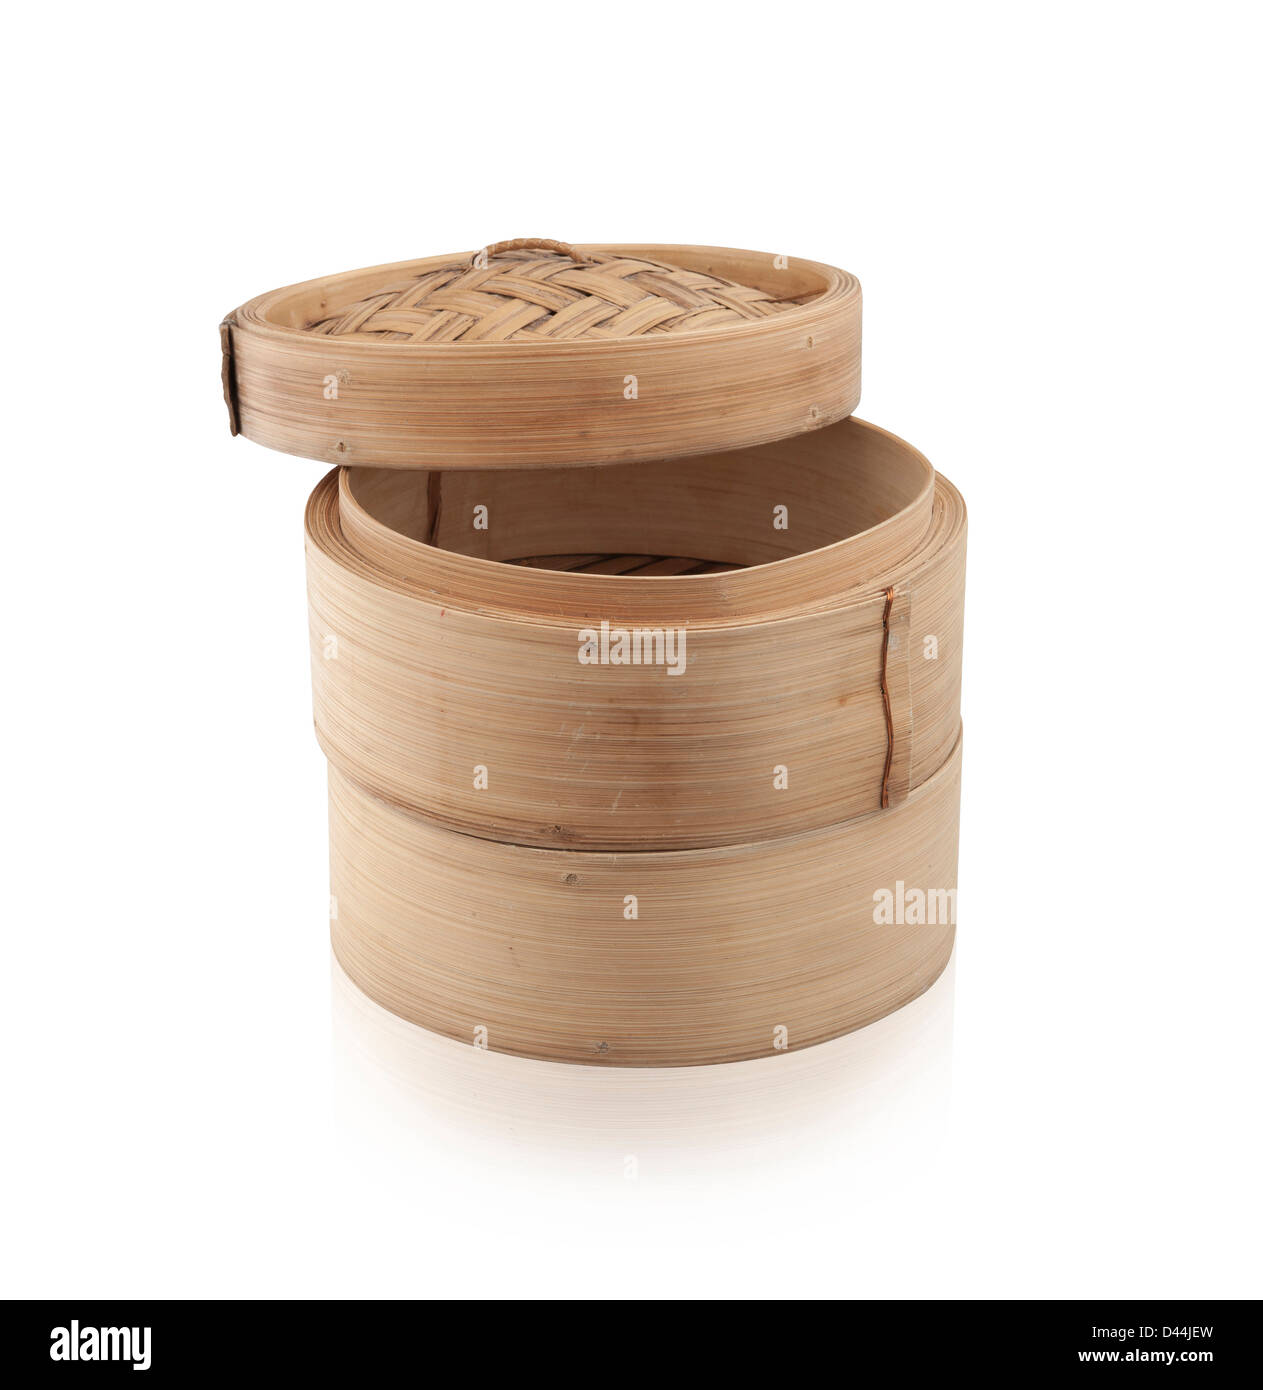 Bamboo dim sum steaming container isolates on white Stock Photo